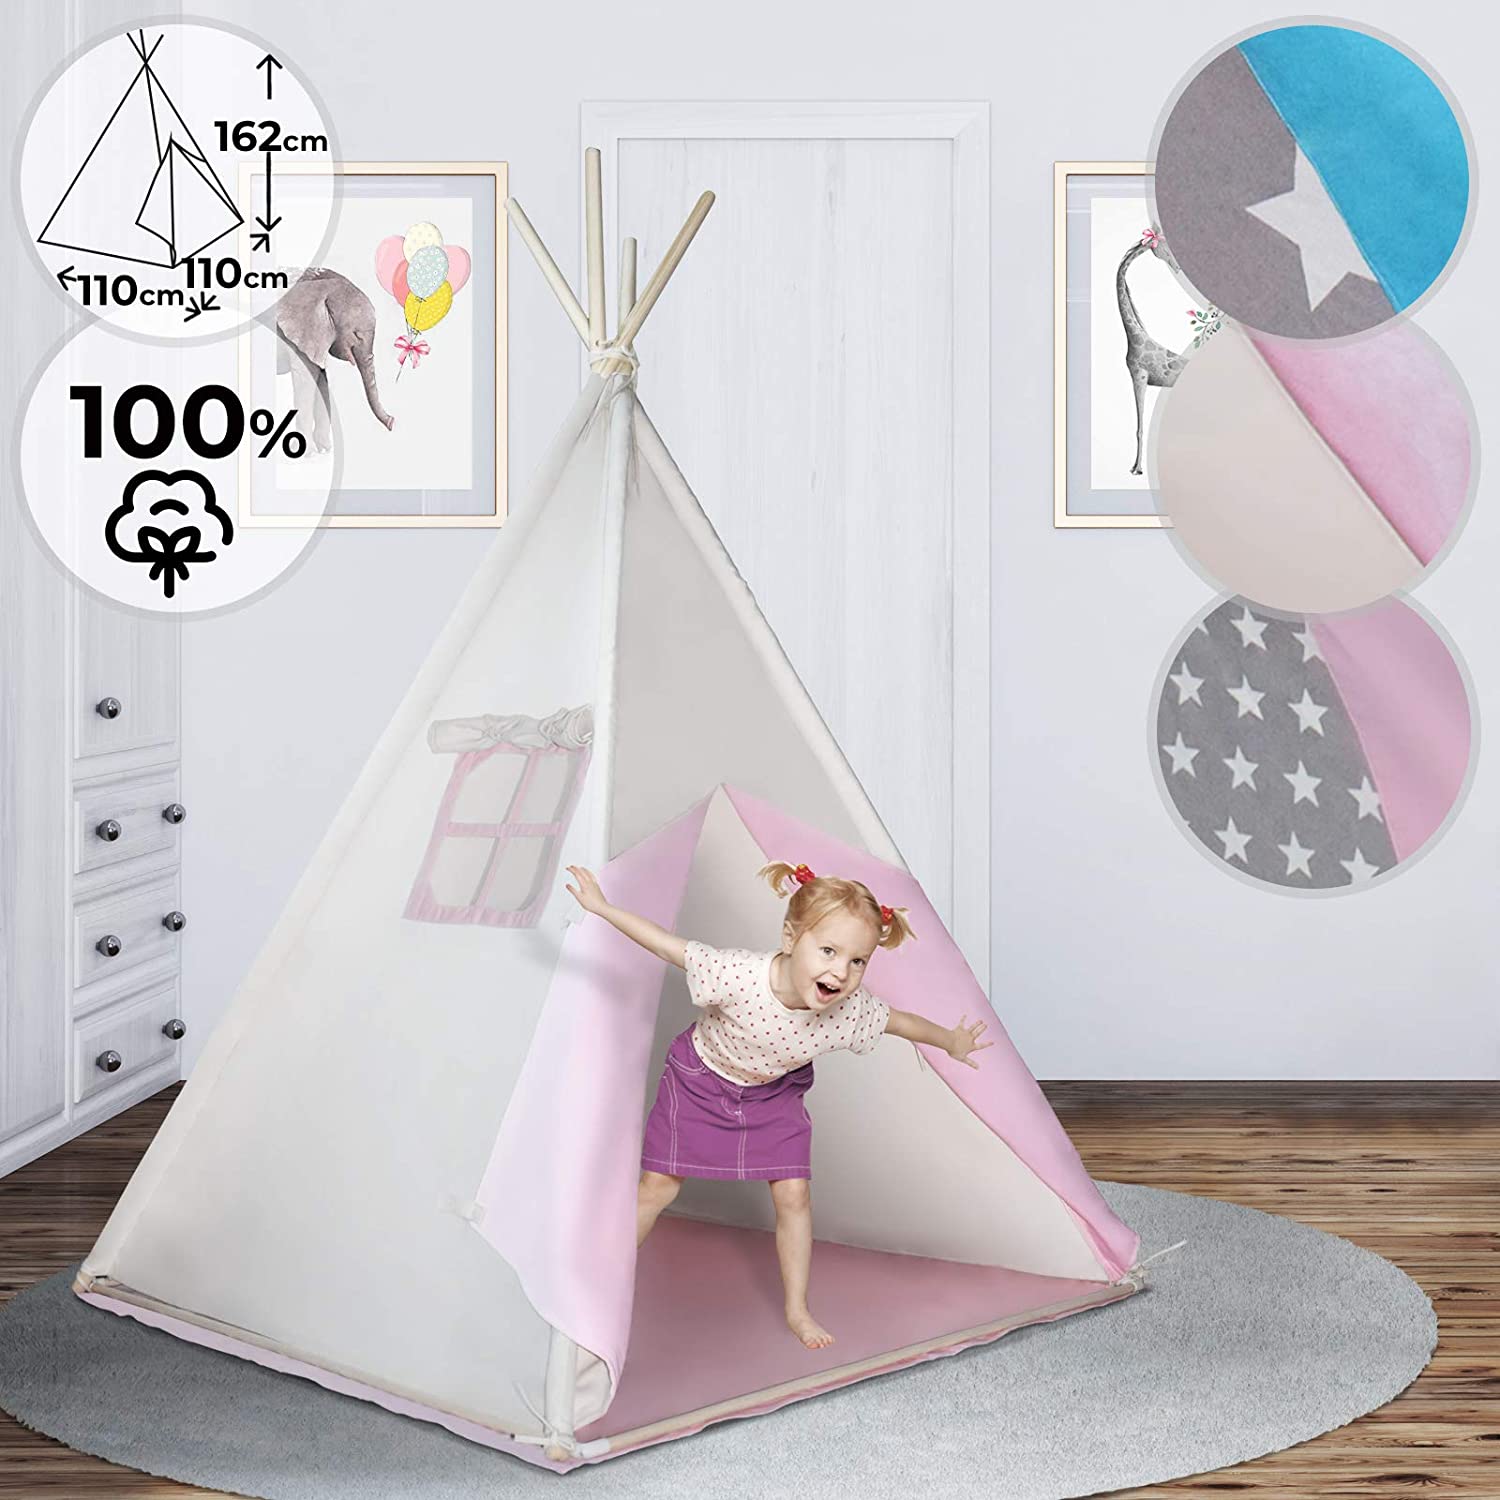 Teepee Play Tent For Children – With Or Without Accessories, 100% Cotton, D